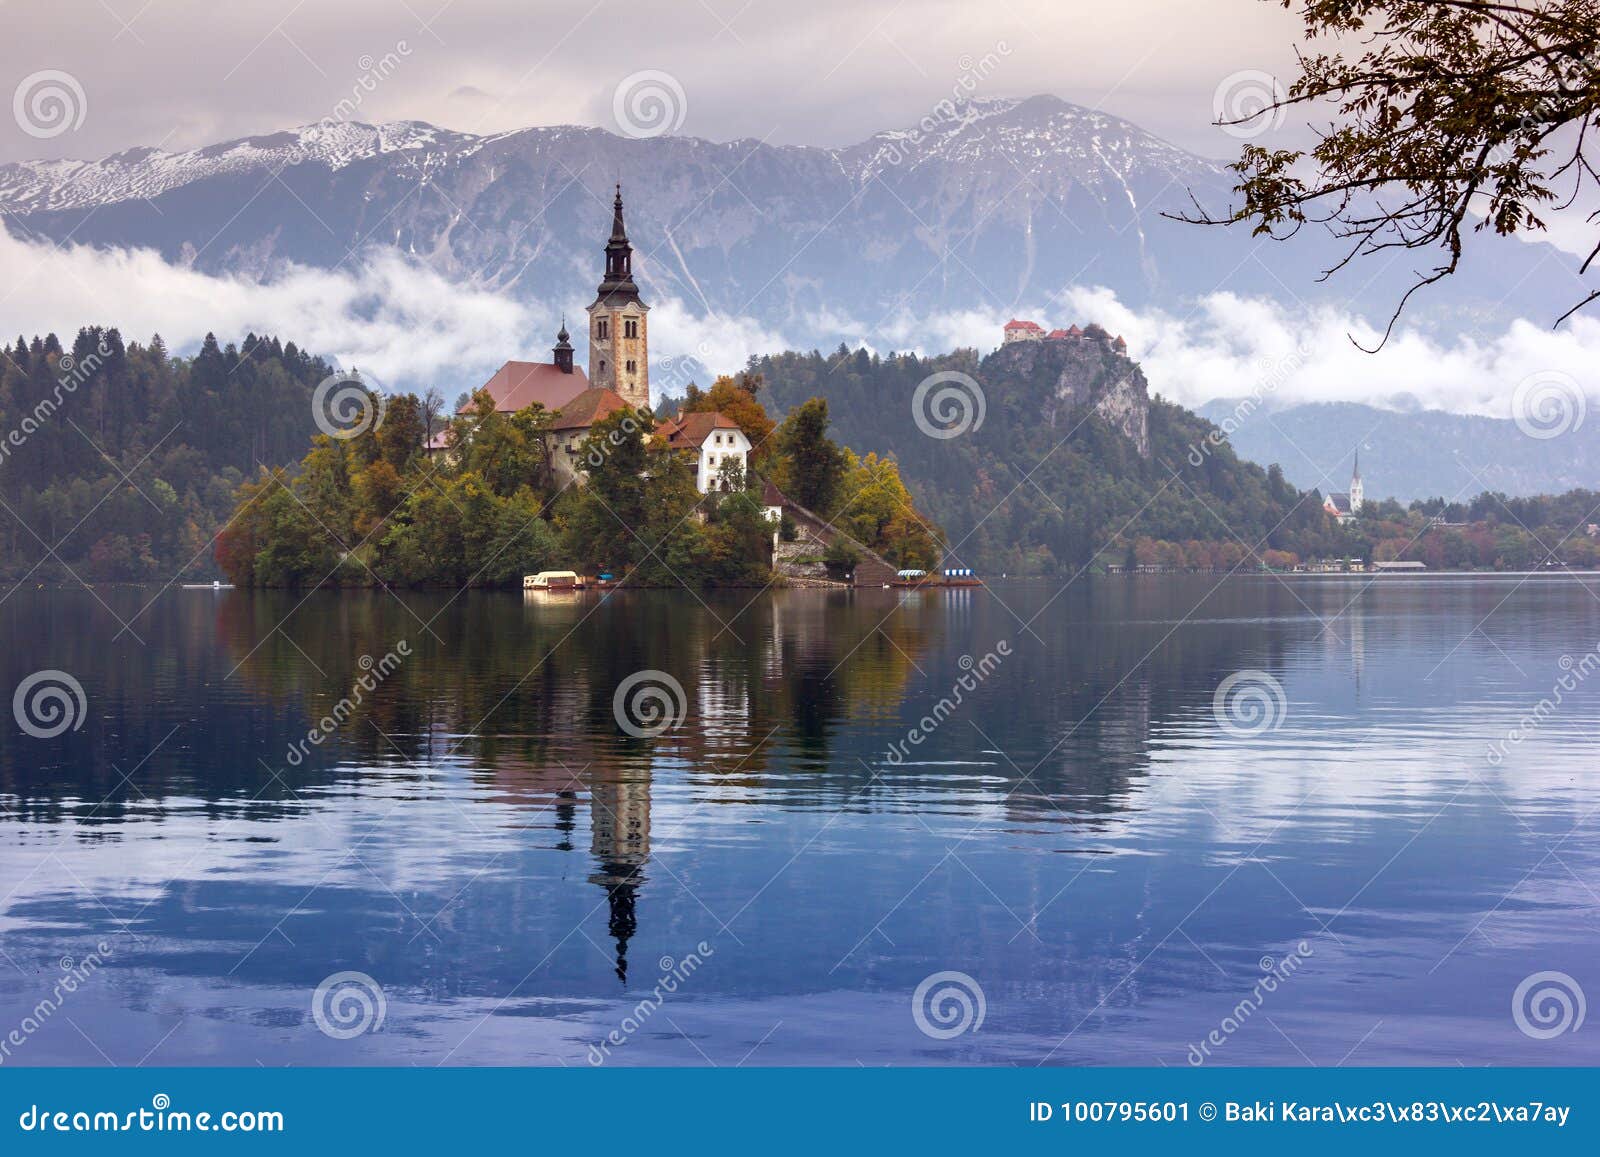 autumn view of the historical church on the island in lake bled